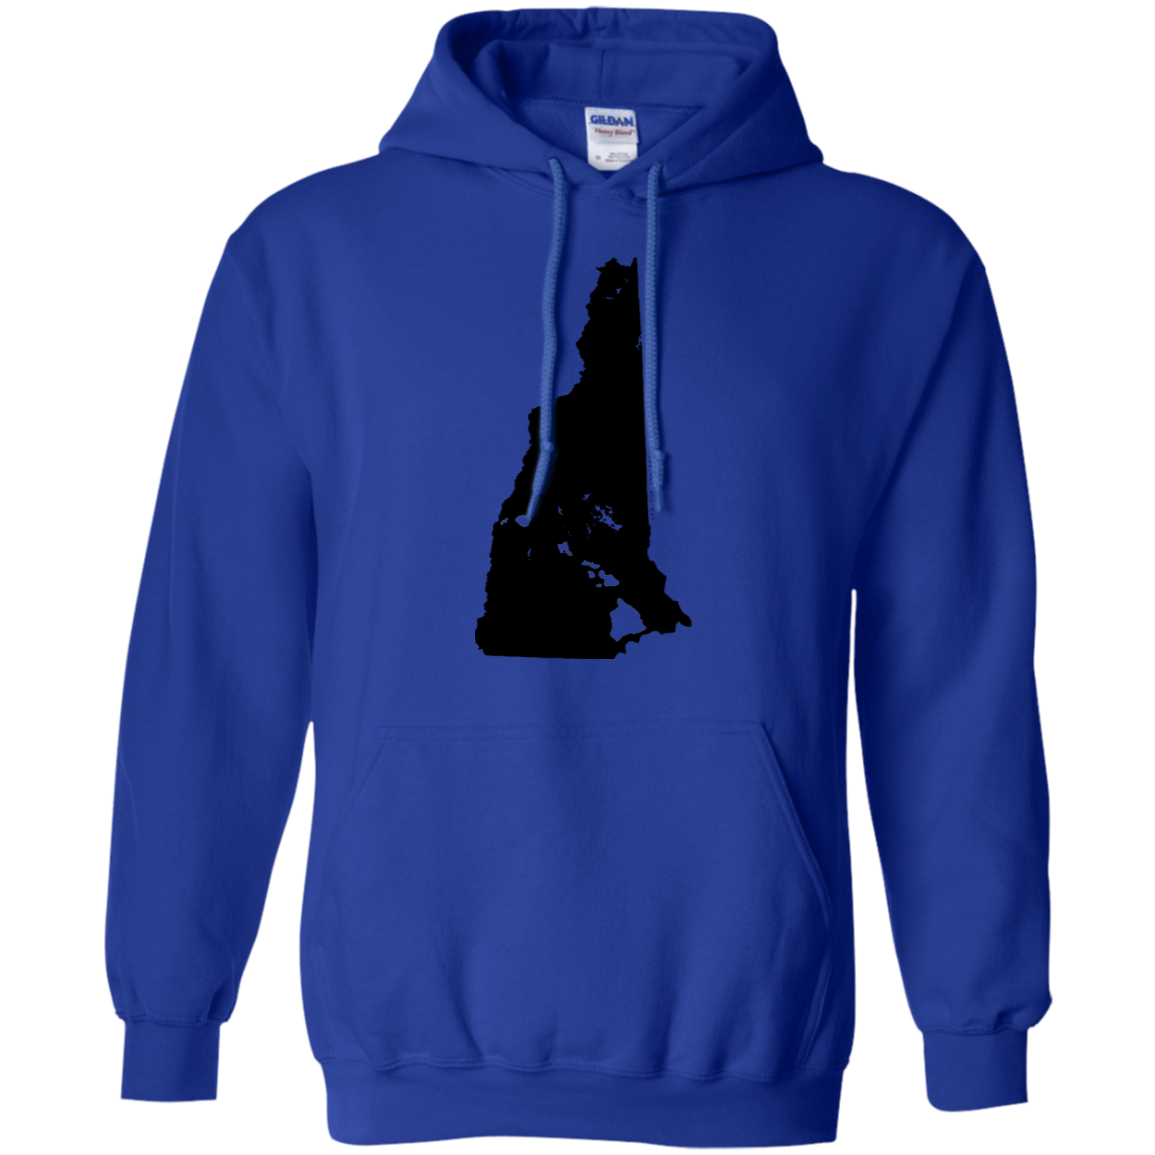 Living in New Hampshire with Hawaii Roots Pullover Hoodie 8 oz., Sweatshirts, Hawaii Nei All Day